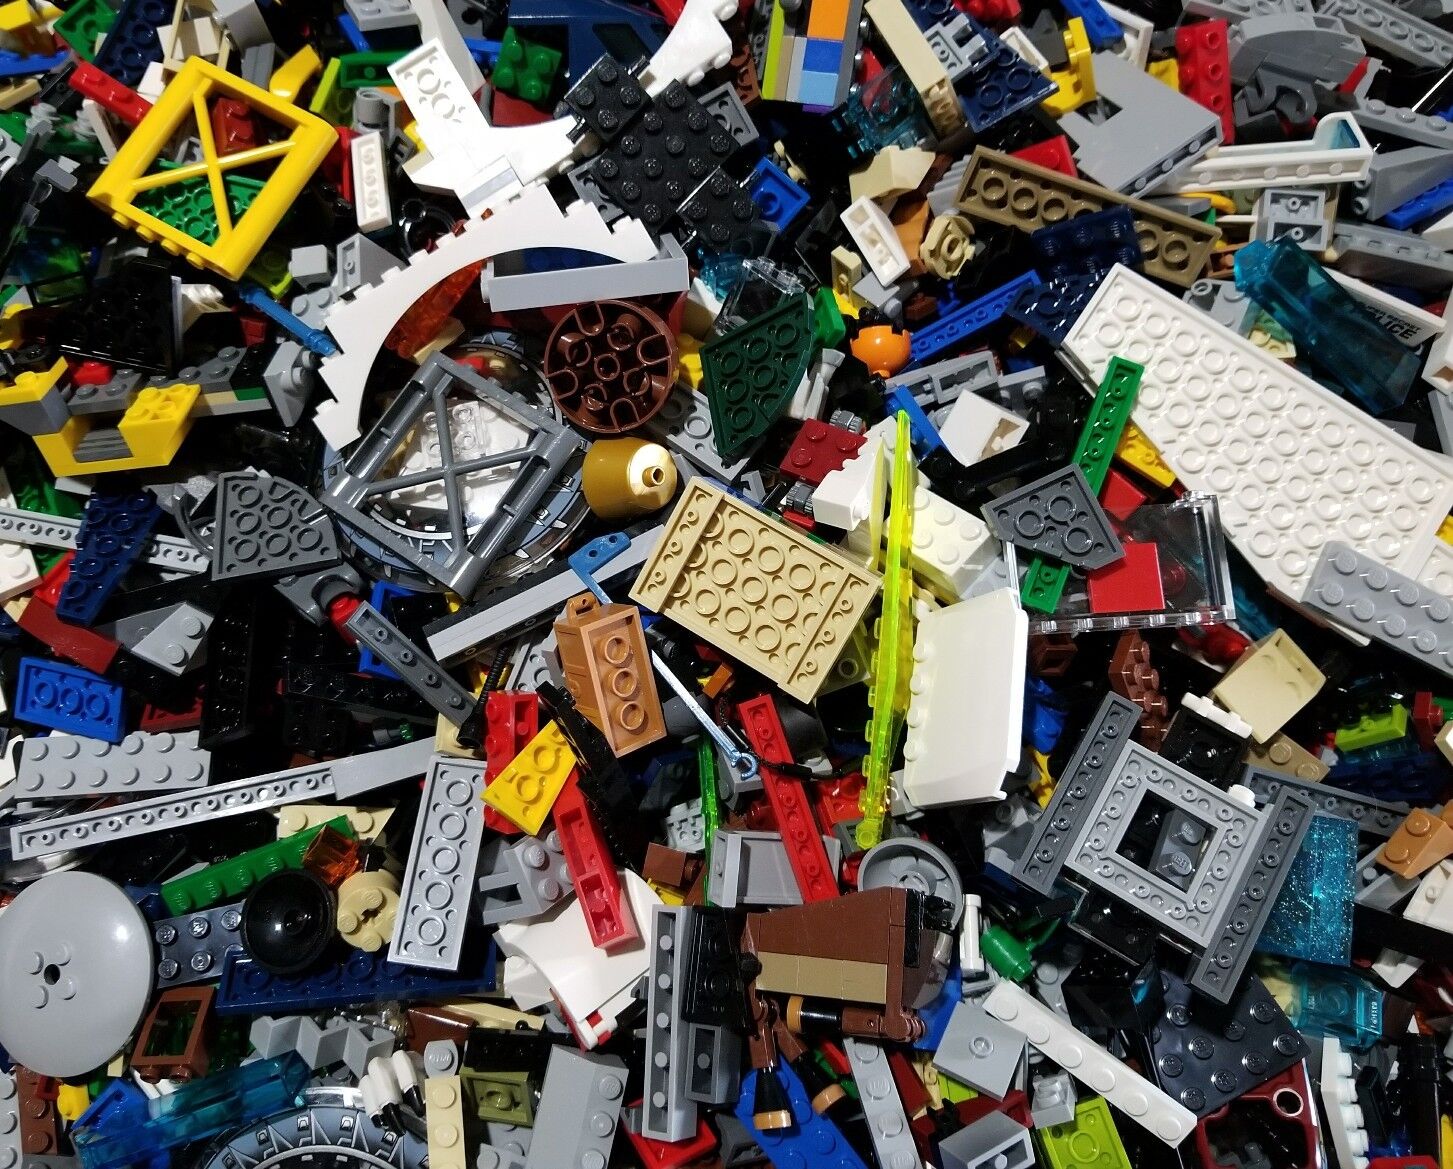 Lego Lot of 200 Pieces Parts Bricks Random From Huge Bulk Assorted Clean Pieces LEGO